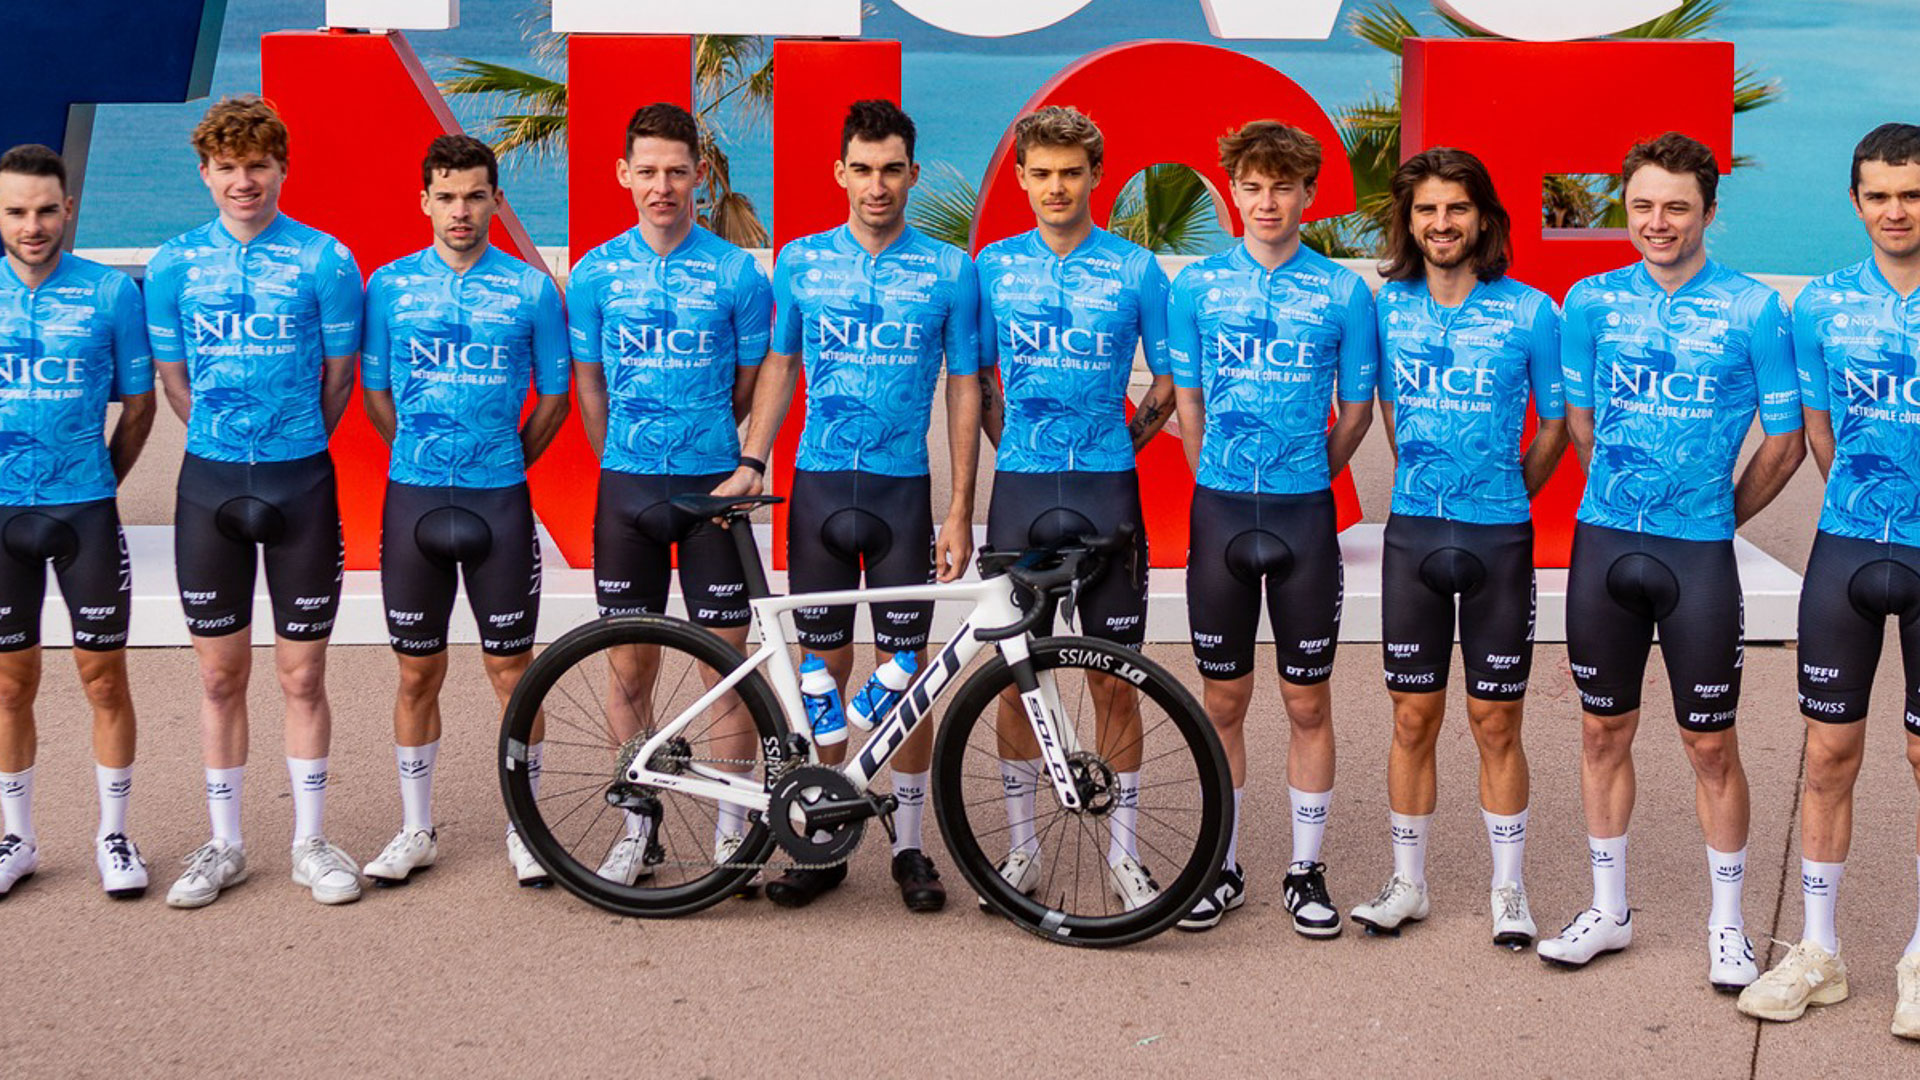 The photo shows the riders of Team Nice Metropole